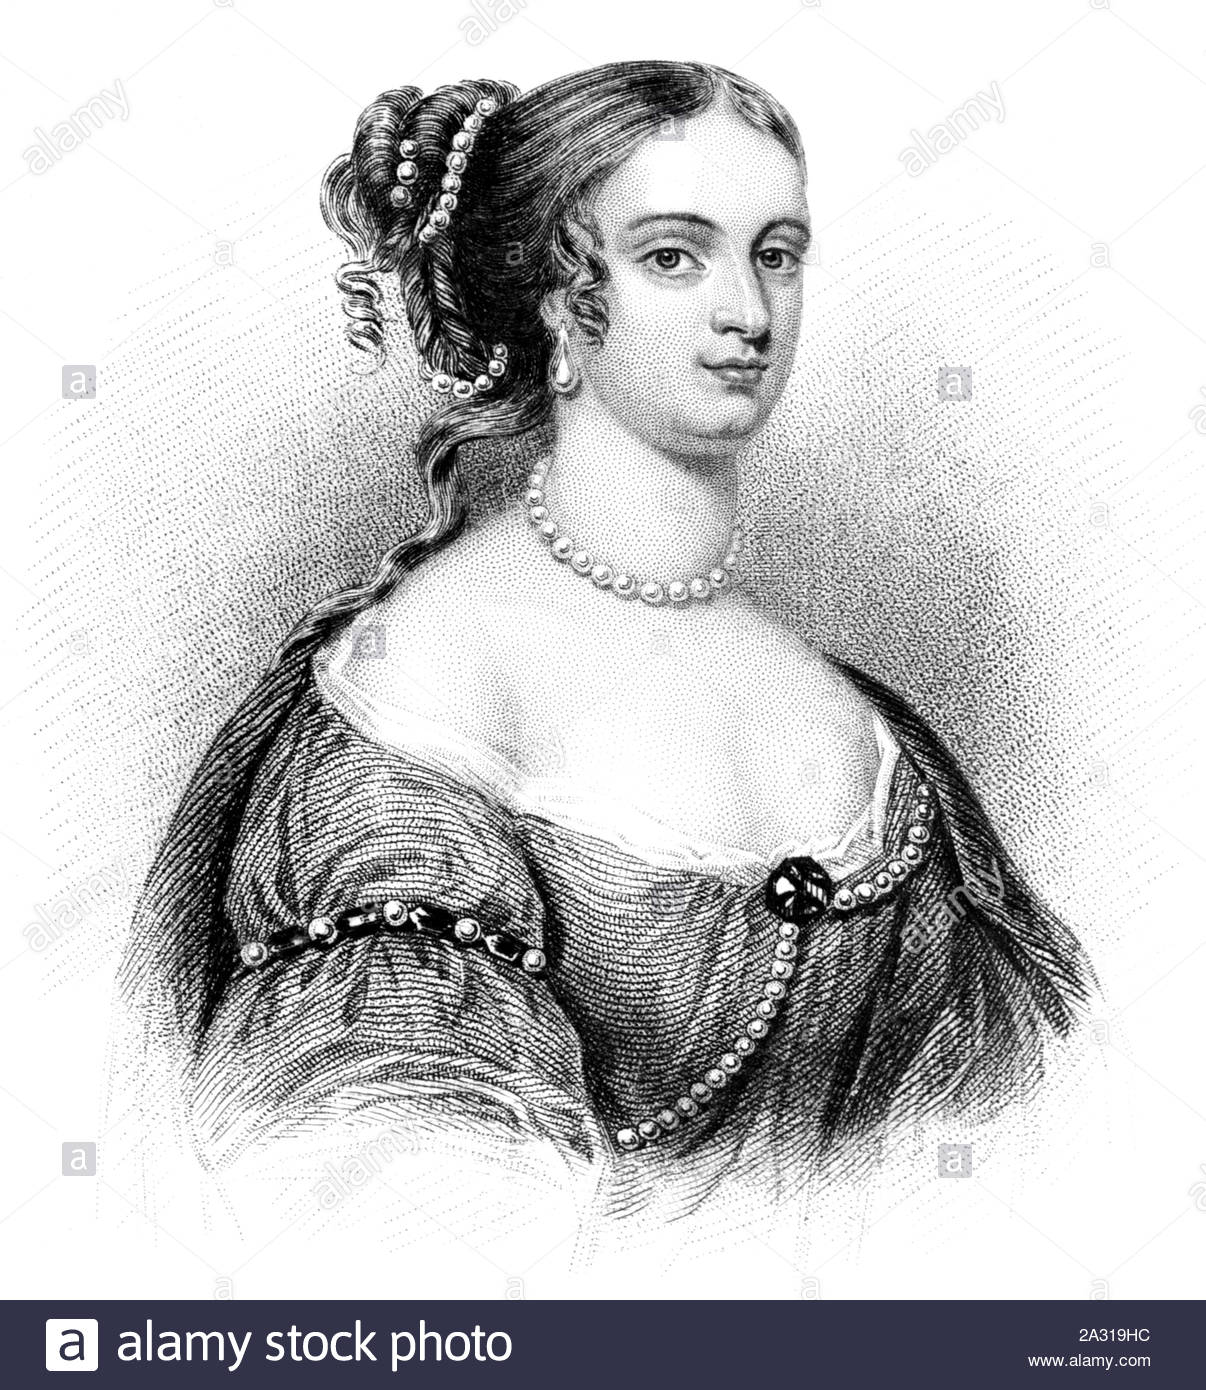 Rachel Wriothesley portrait, Lady Russell, 1636 – 1723, was an English noblewoman, heiress, and author, vintage illustration from 1850 Stock Photo